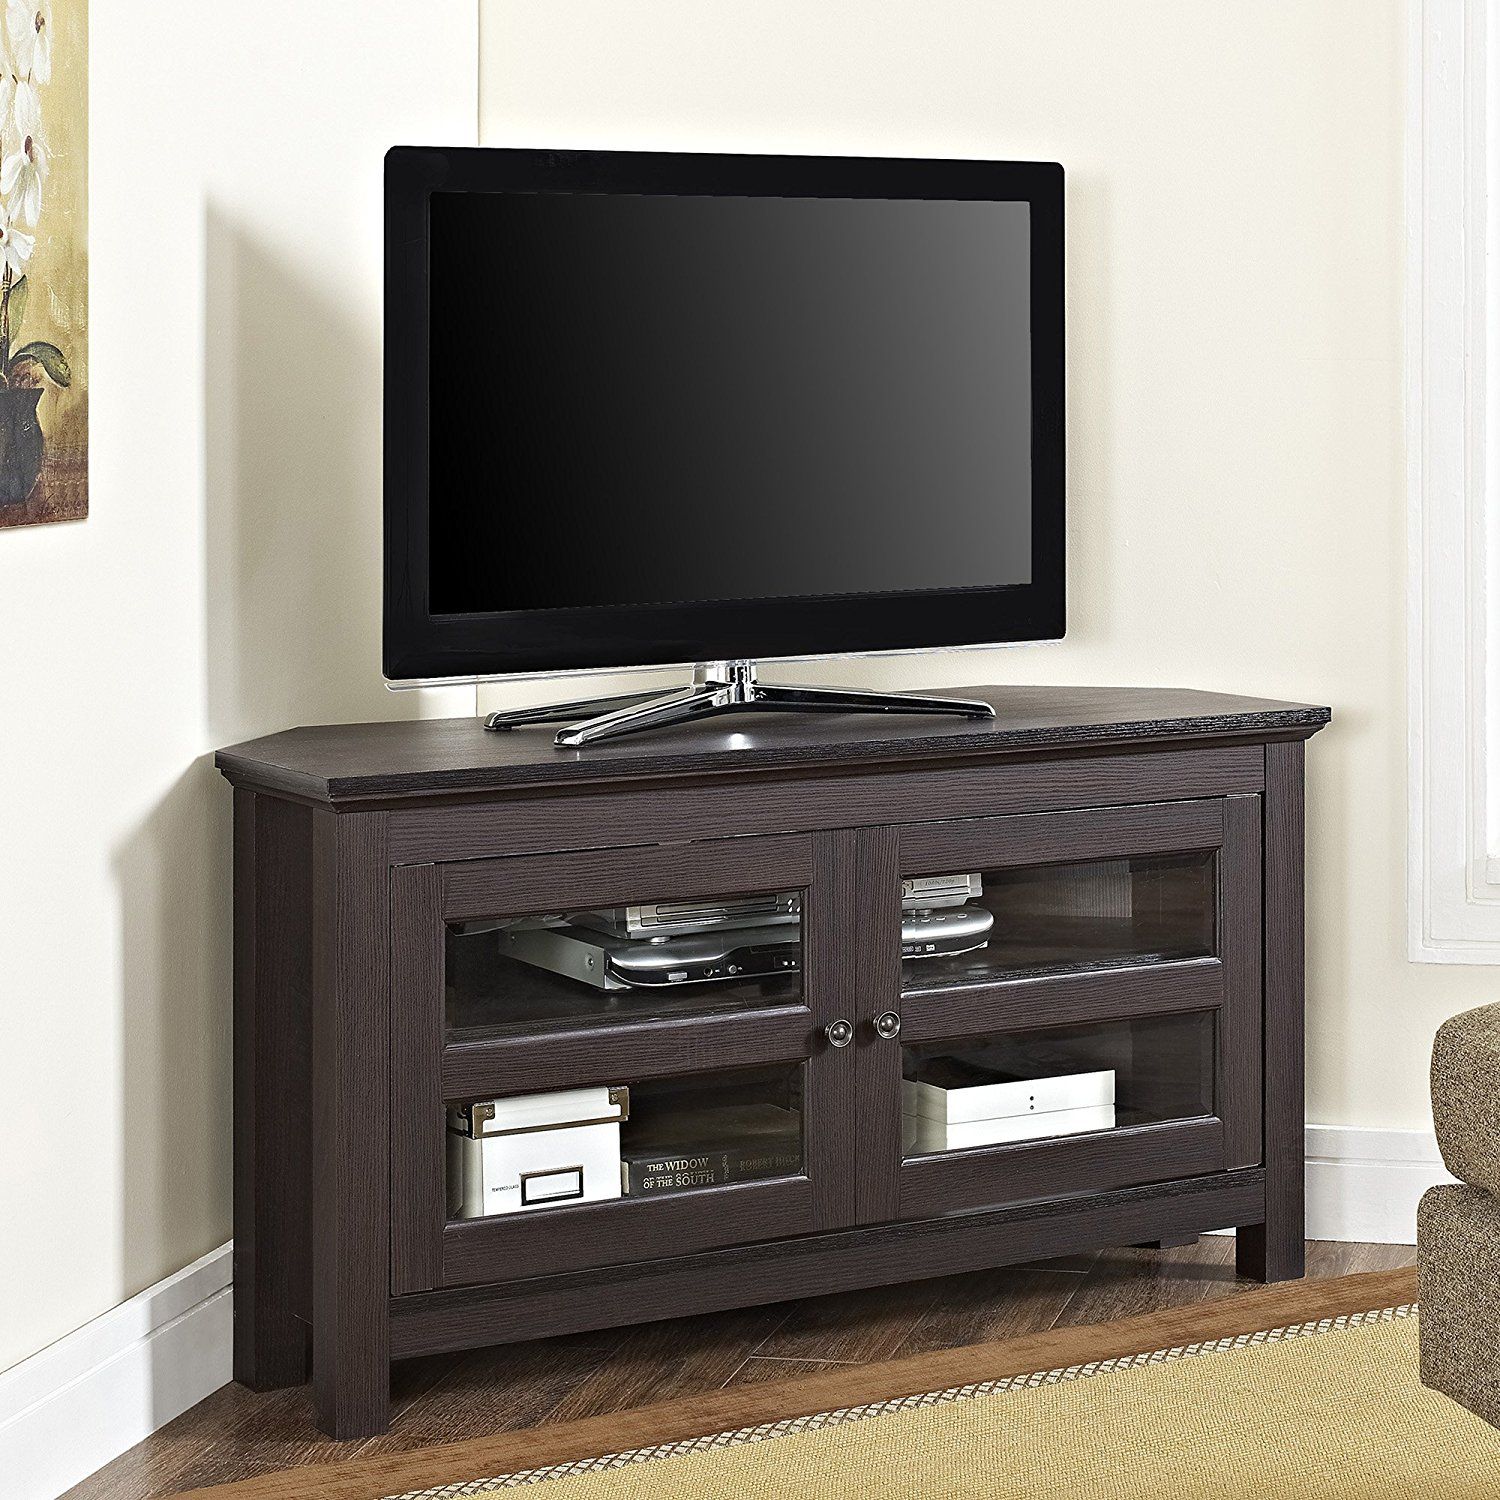 Top 10 Best Modern Tall Corner Tv Stands In 2021 Reviews Inside Tall Tv Cabinets Corner Unit (Photo 2 of 15)